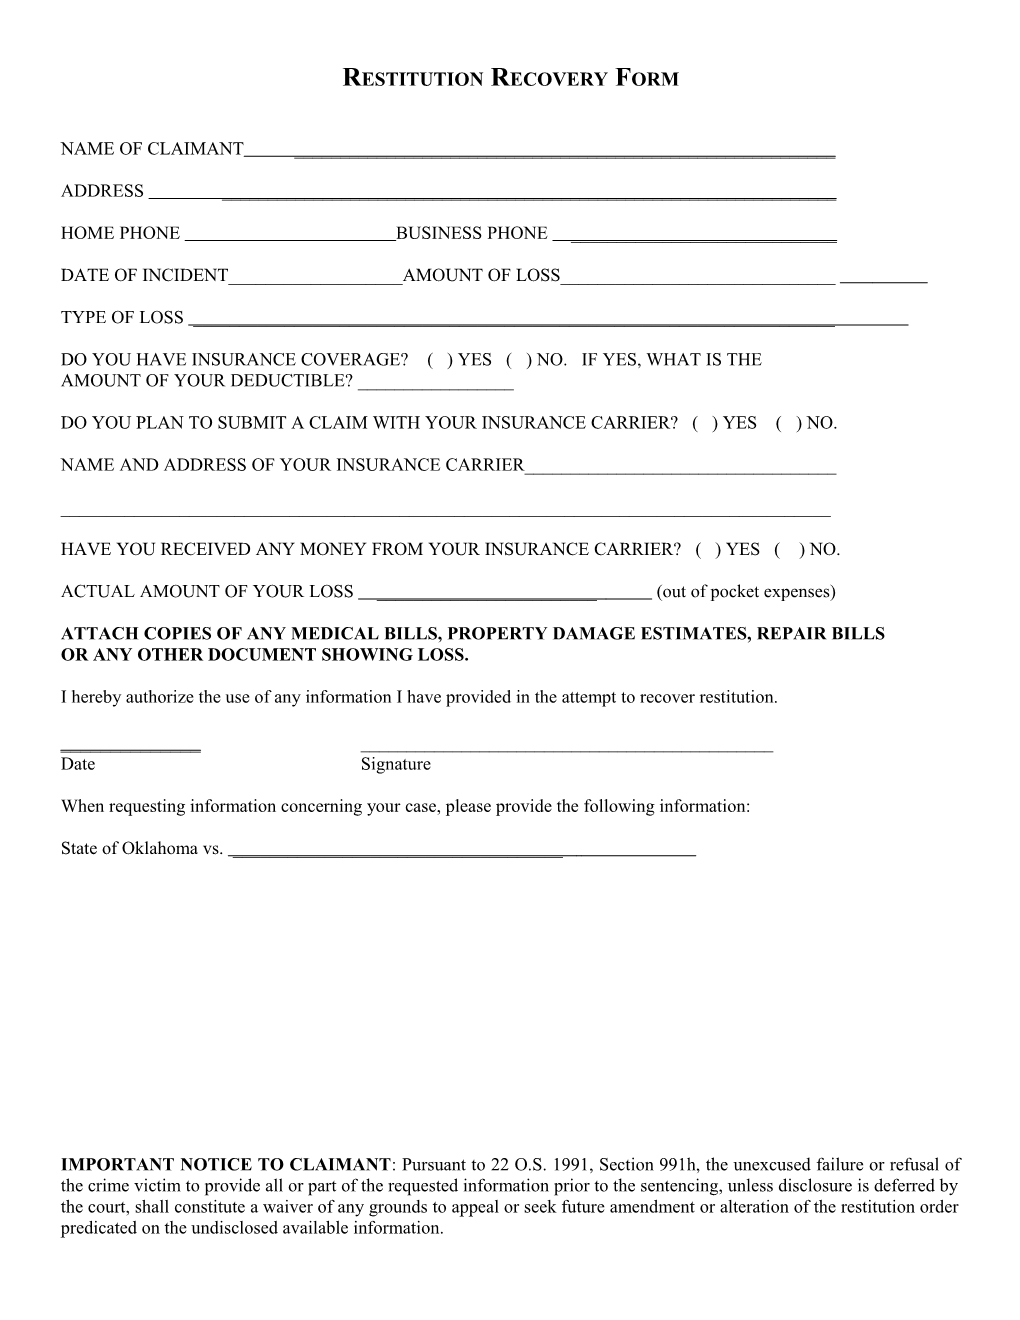 Restitution Recovery Form